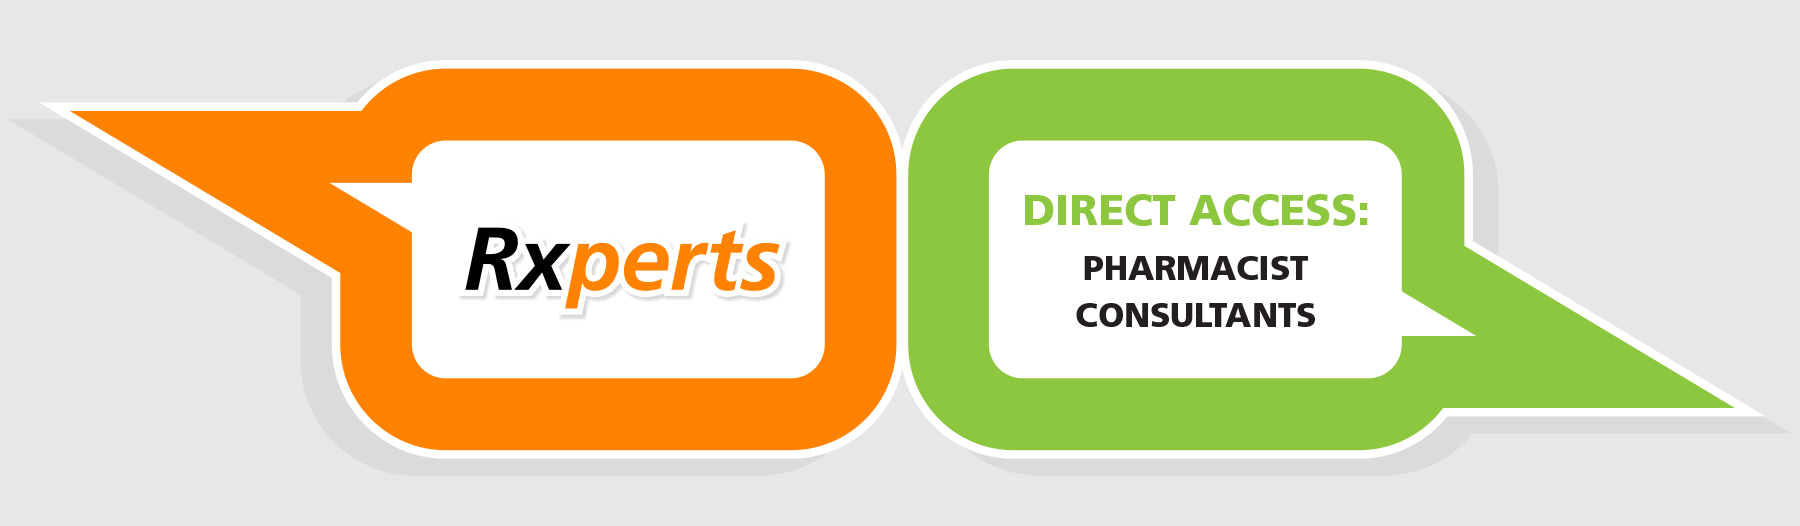 image showing Rxperts and pharmacist consultants